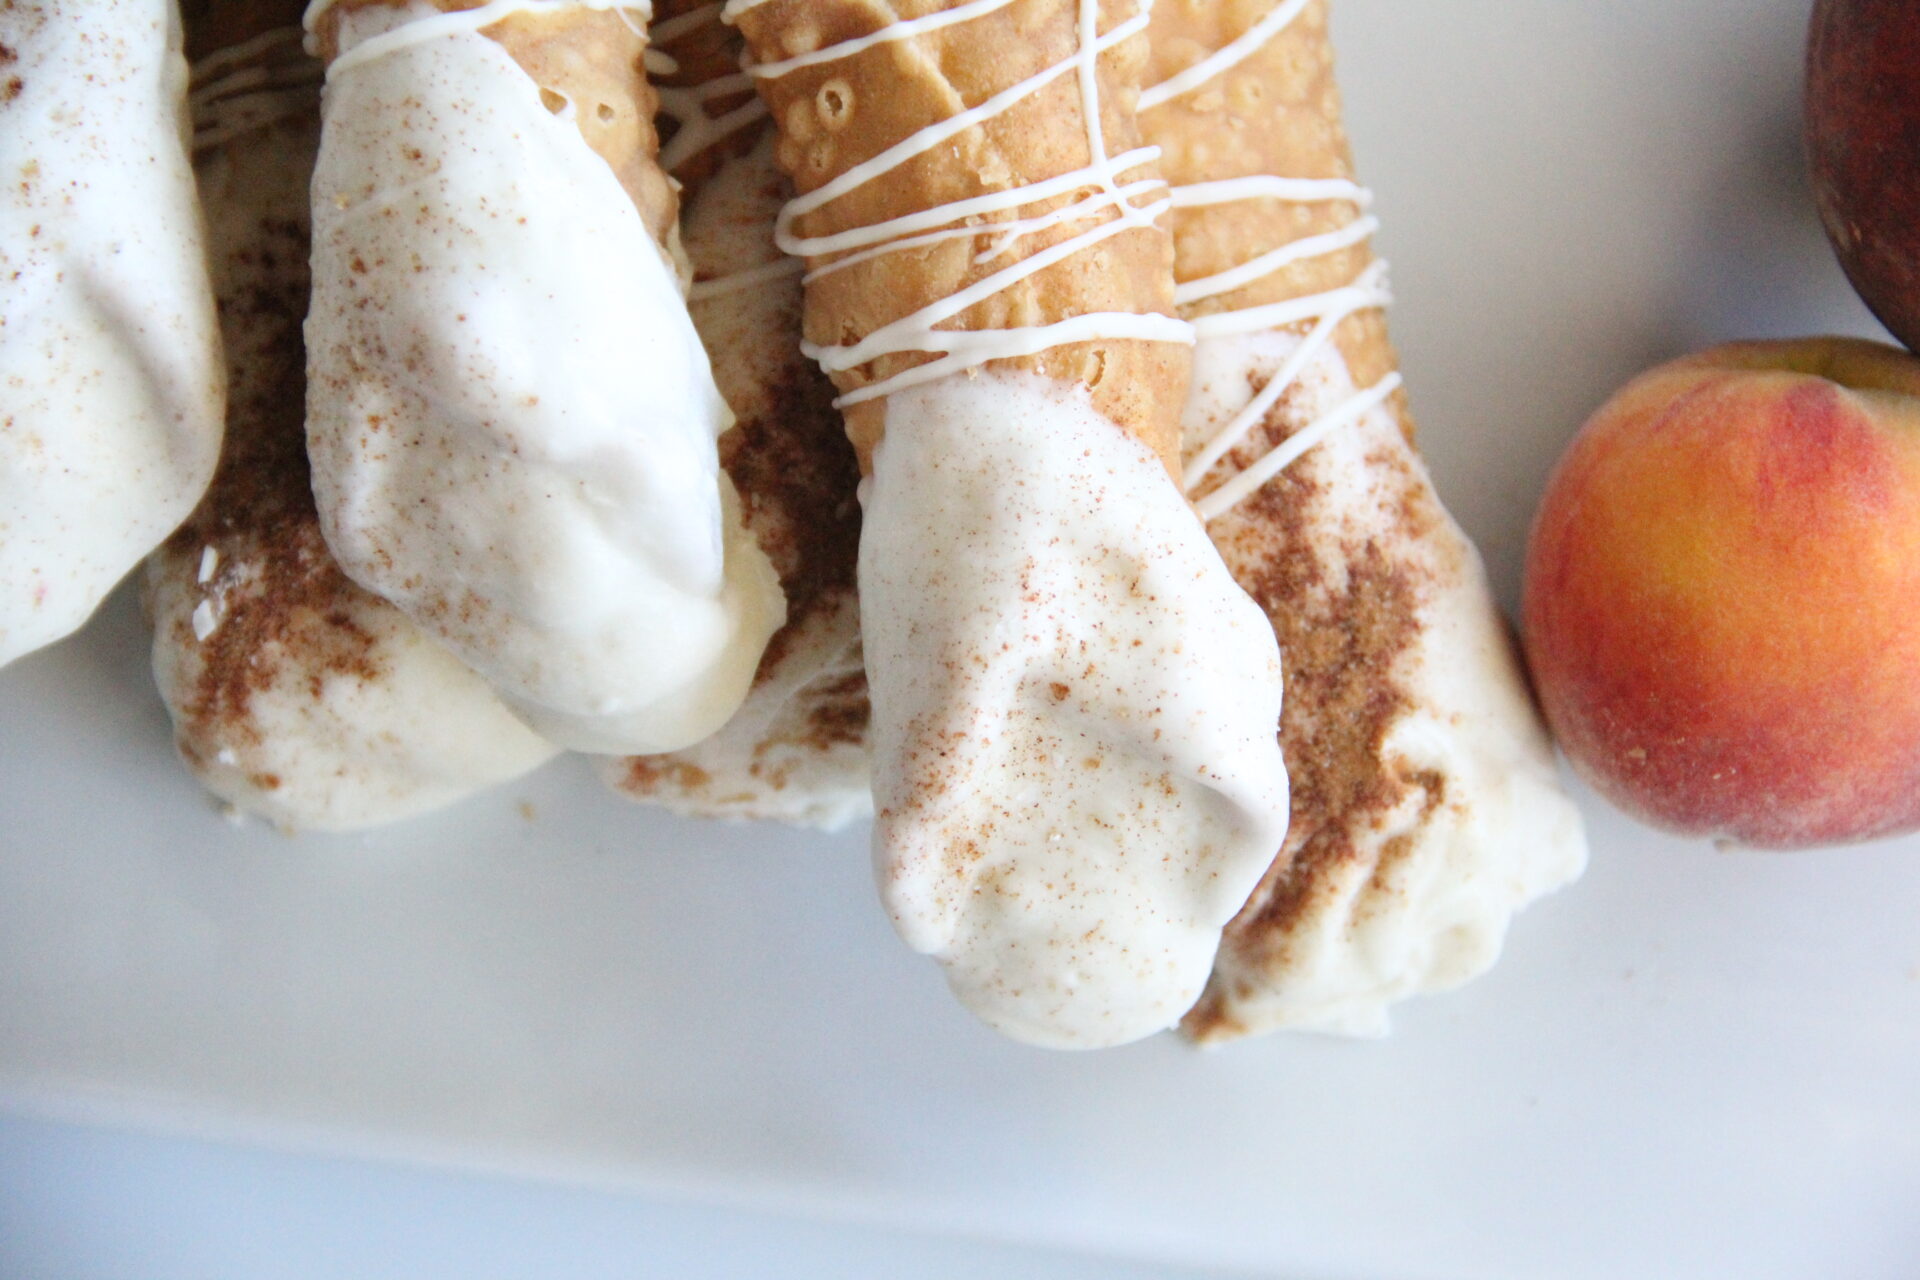 Peach cannoli's from Uptown Downtown in Ruston.